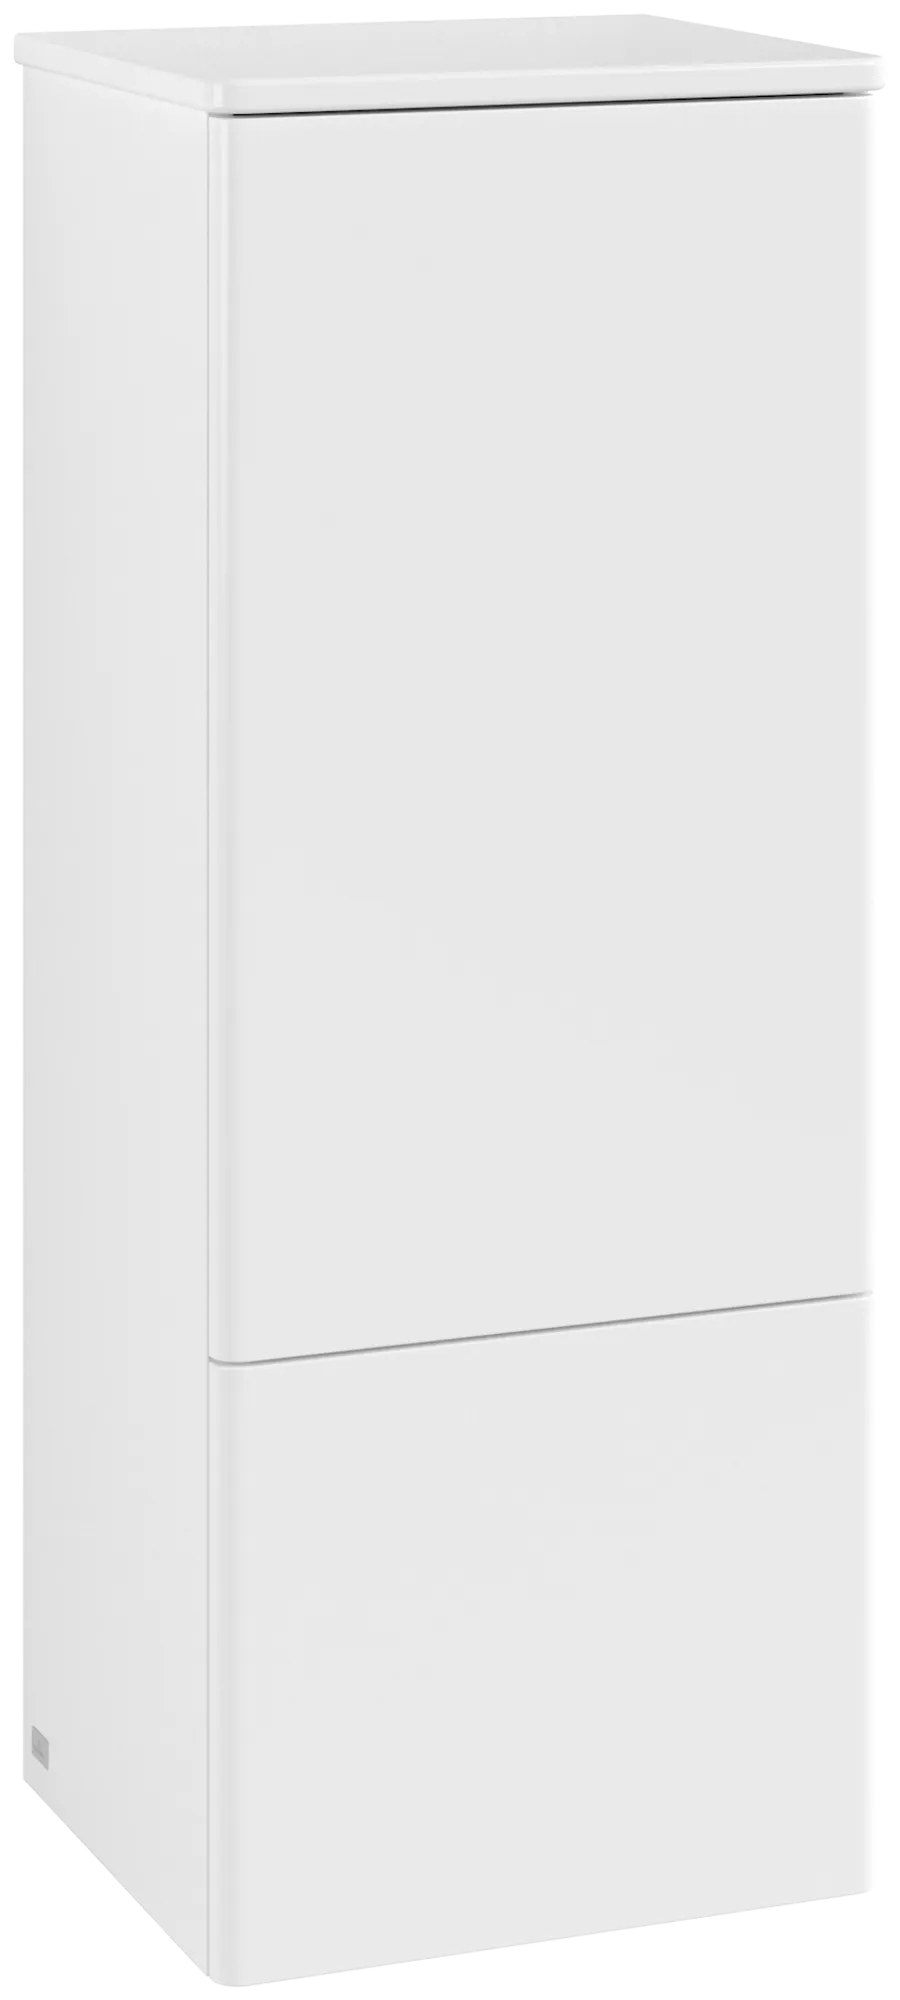 VILLEROY BOCH Antao Medium-height cabinet, with lighting, 1 door, 414 x 1039 x 356 mm, Front without structure, White Matt Lacquer / White Matt Lacquer #L44000MT resmi